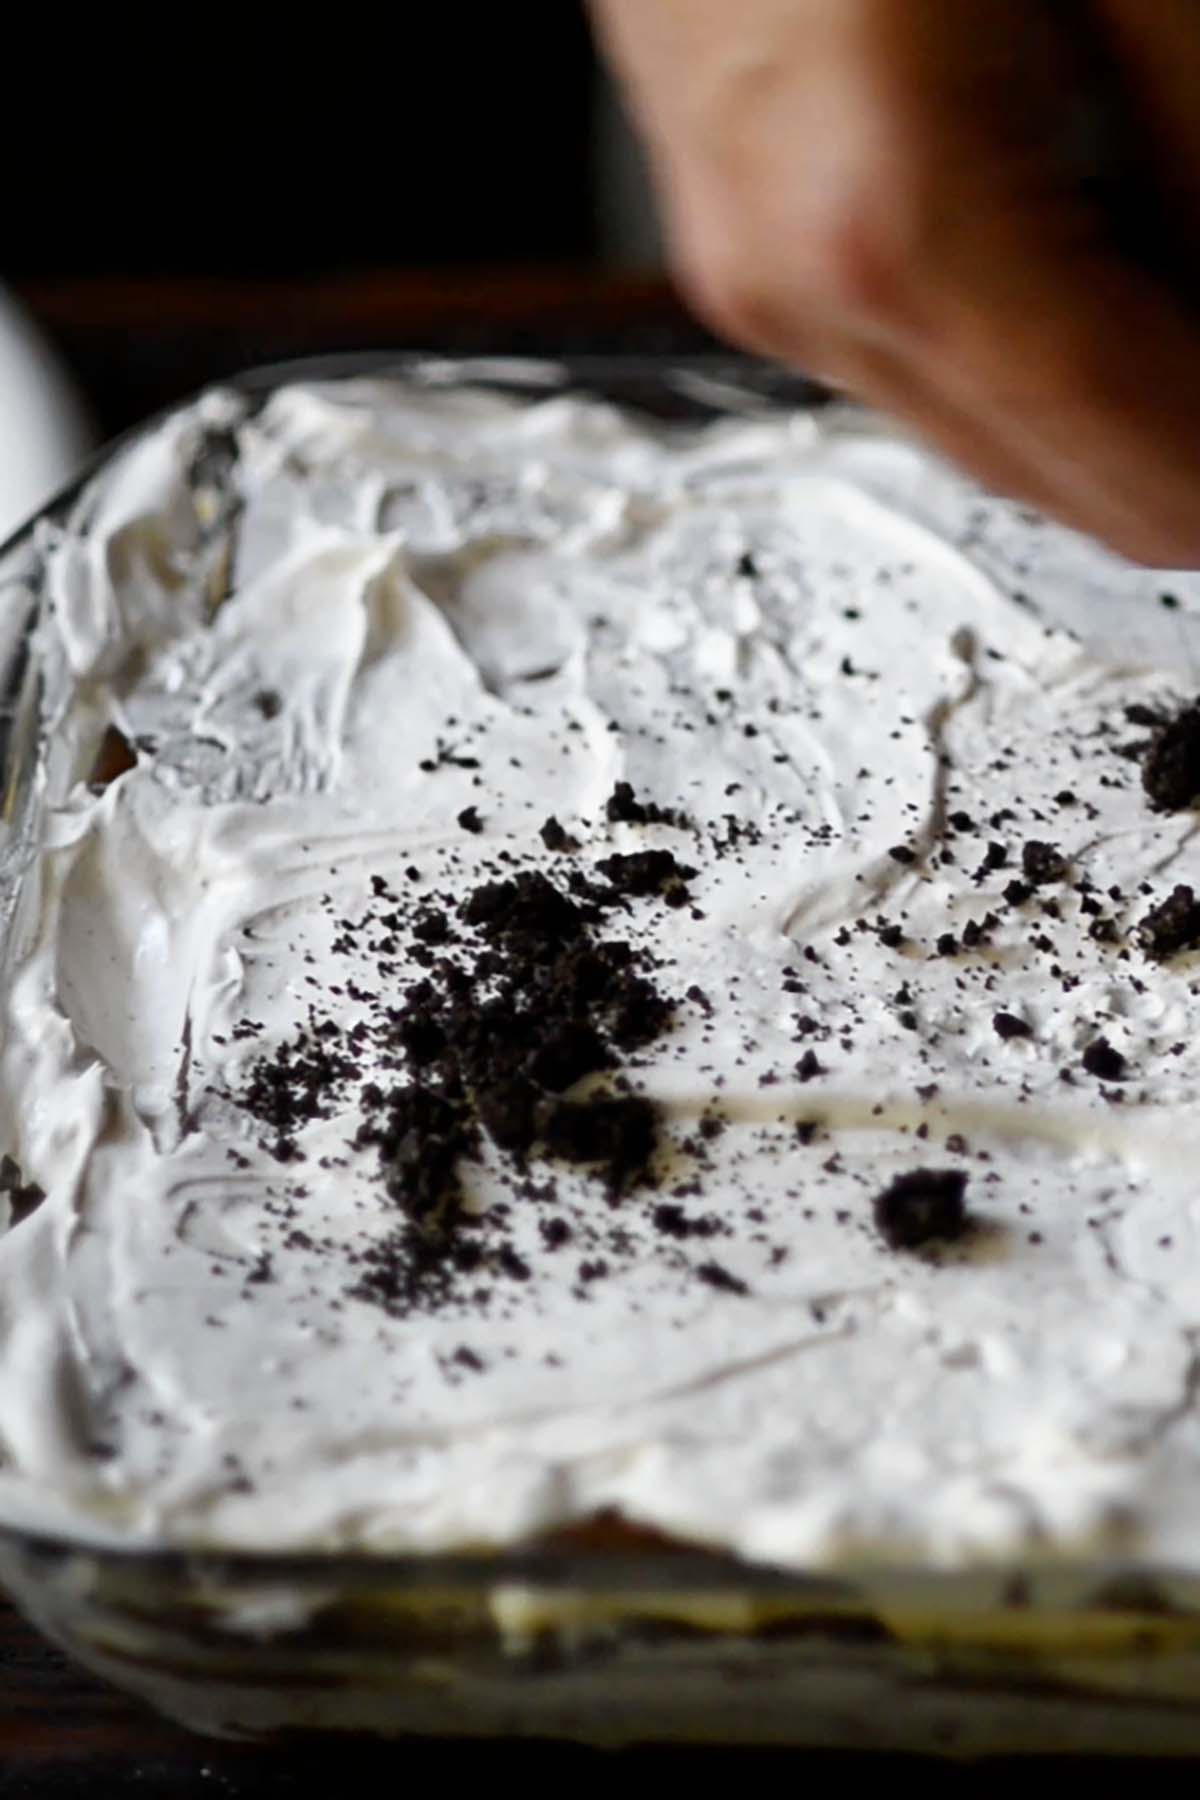 Whipped topping spread over the top of layered ice cream sandwiches with crushed Oreos sprinkled over the top.